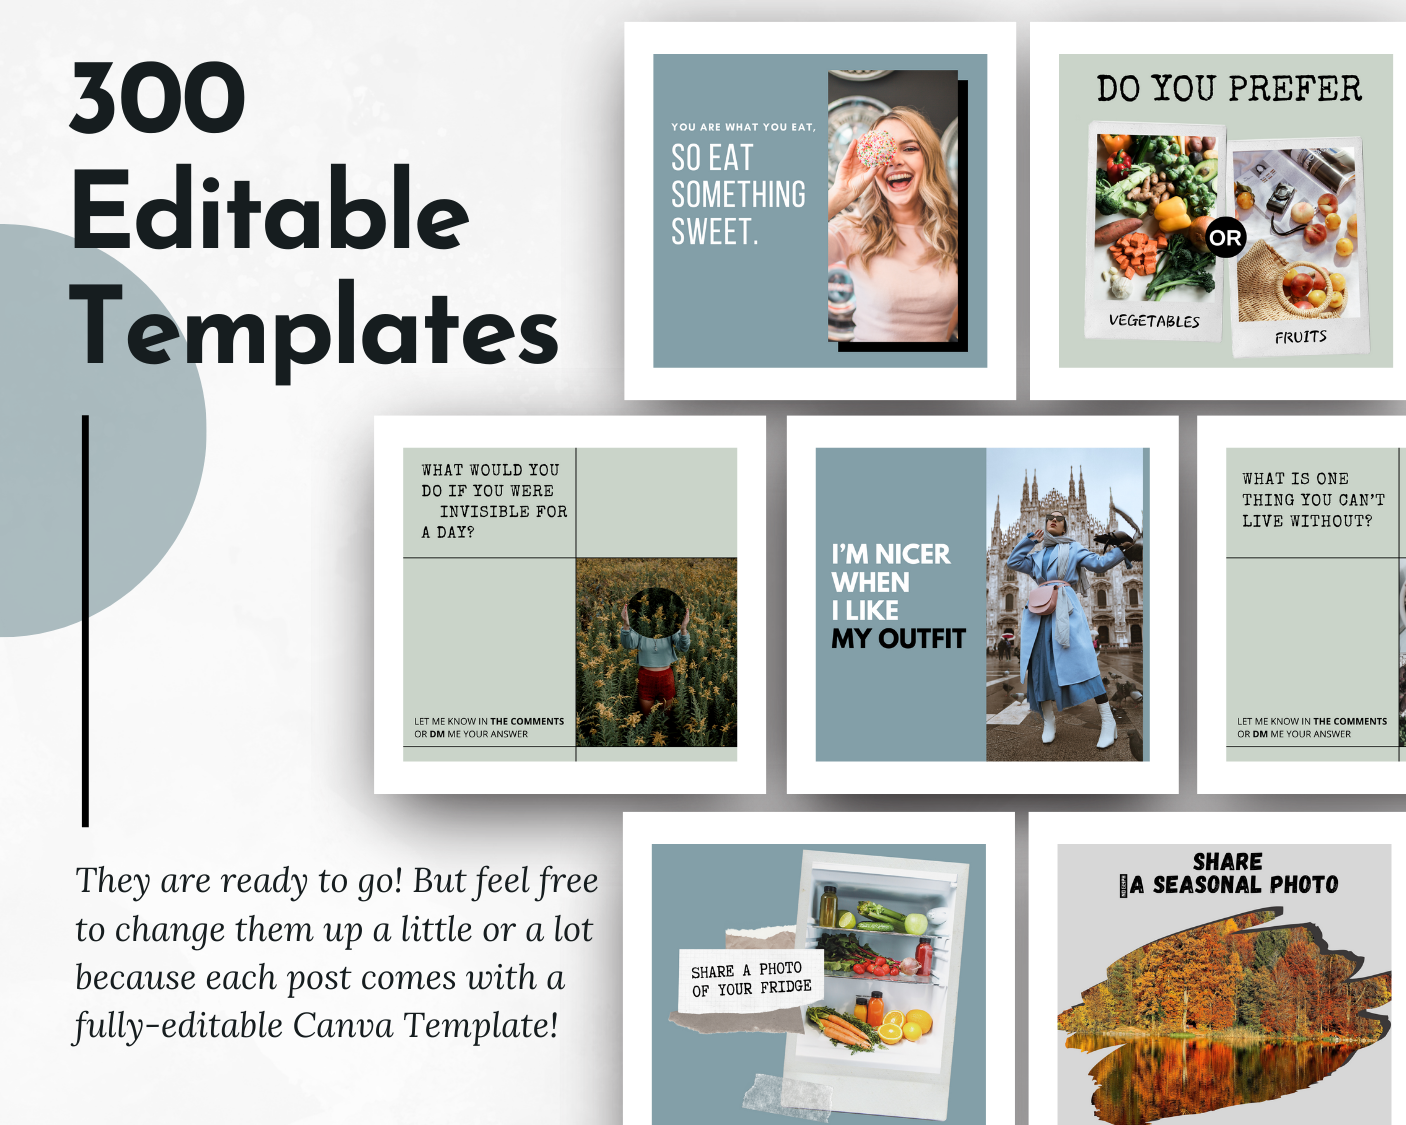 300 editable templates for Lifestyle Social Media Post Bundle with Canva Templates from Socially Inclined encompassing lifestyle and social media content.